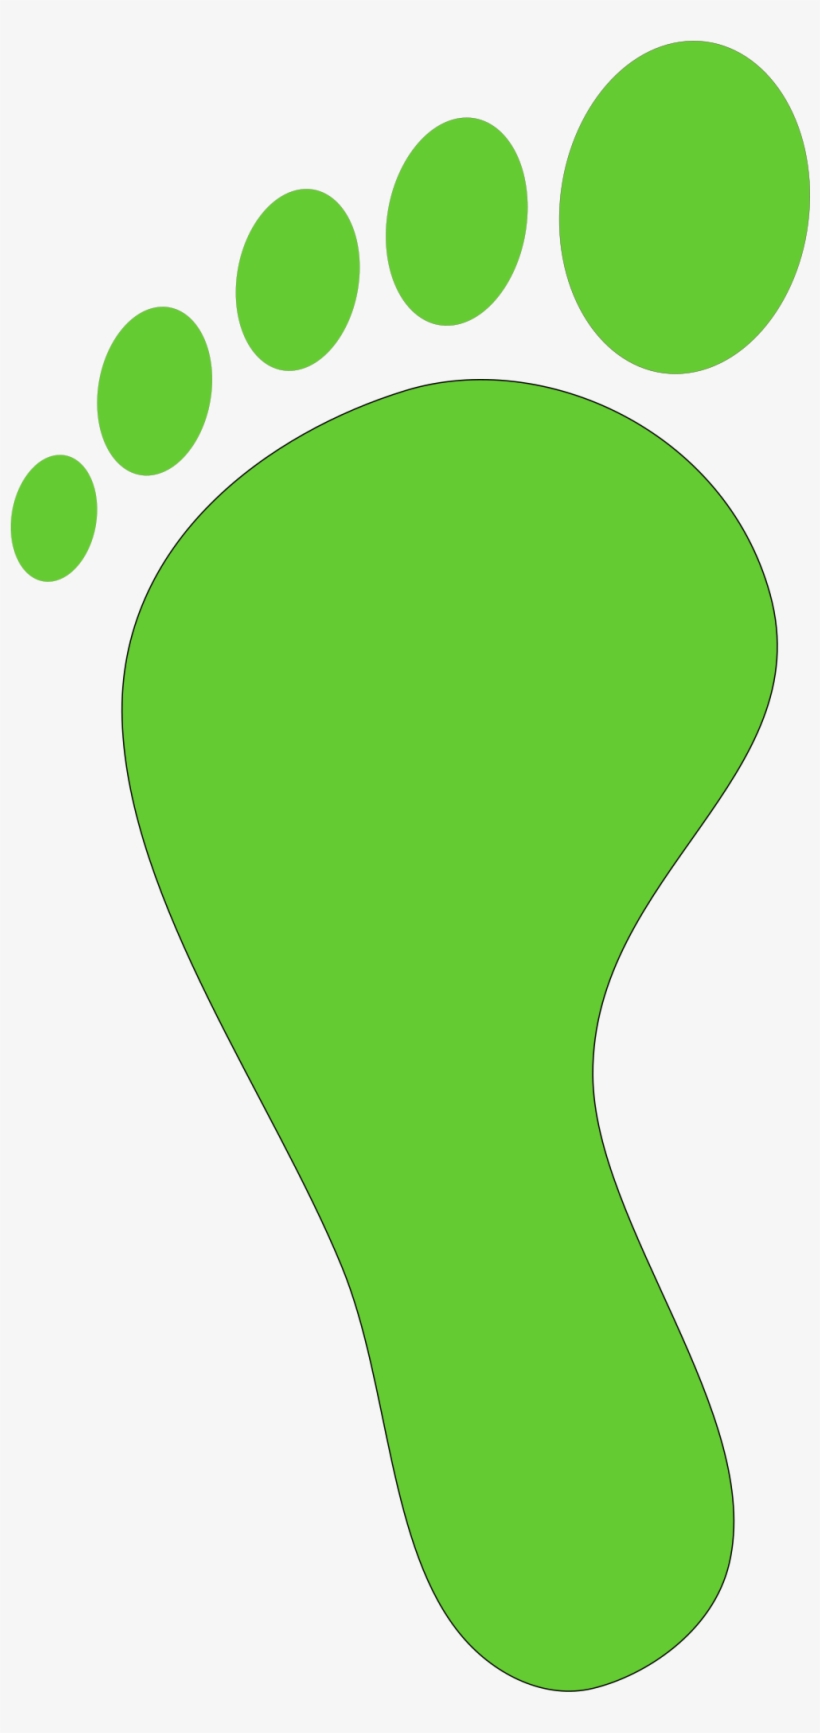 This Free Icons Png Design Of Green Foot Print, transparent png #1048093